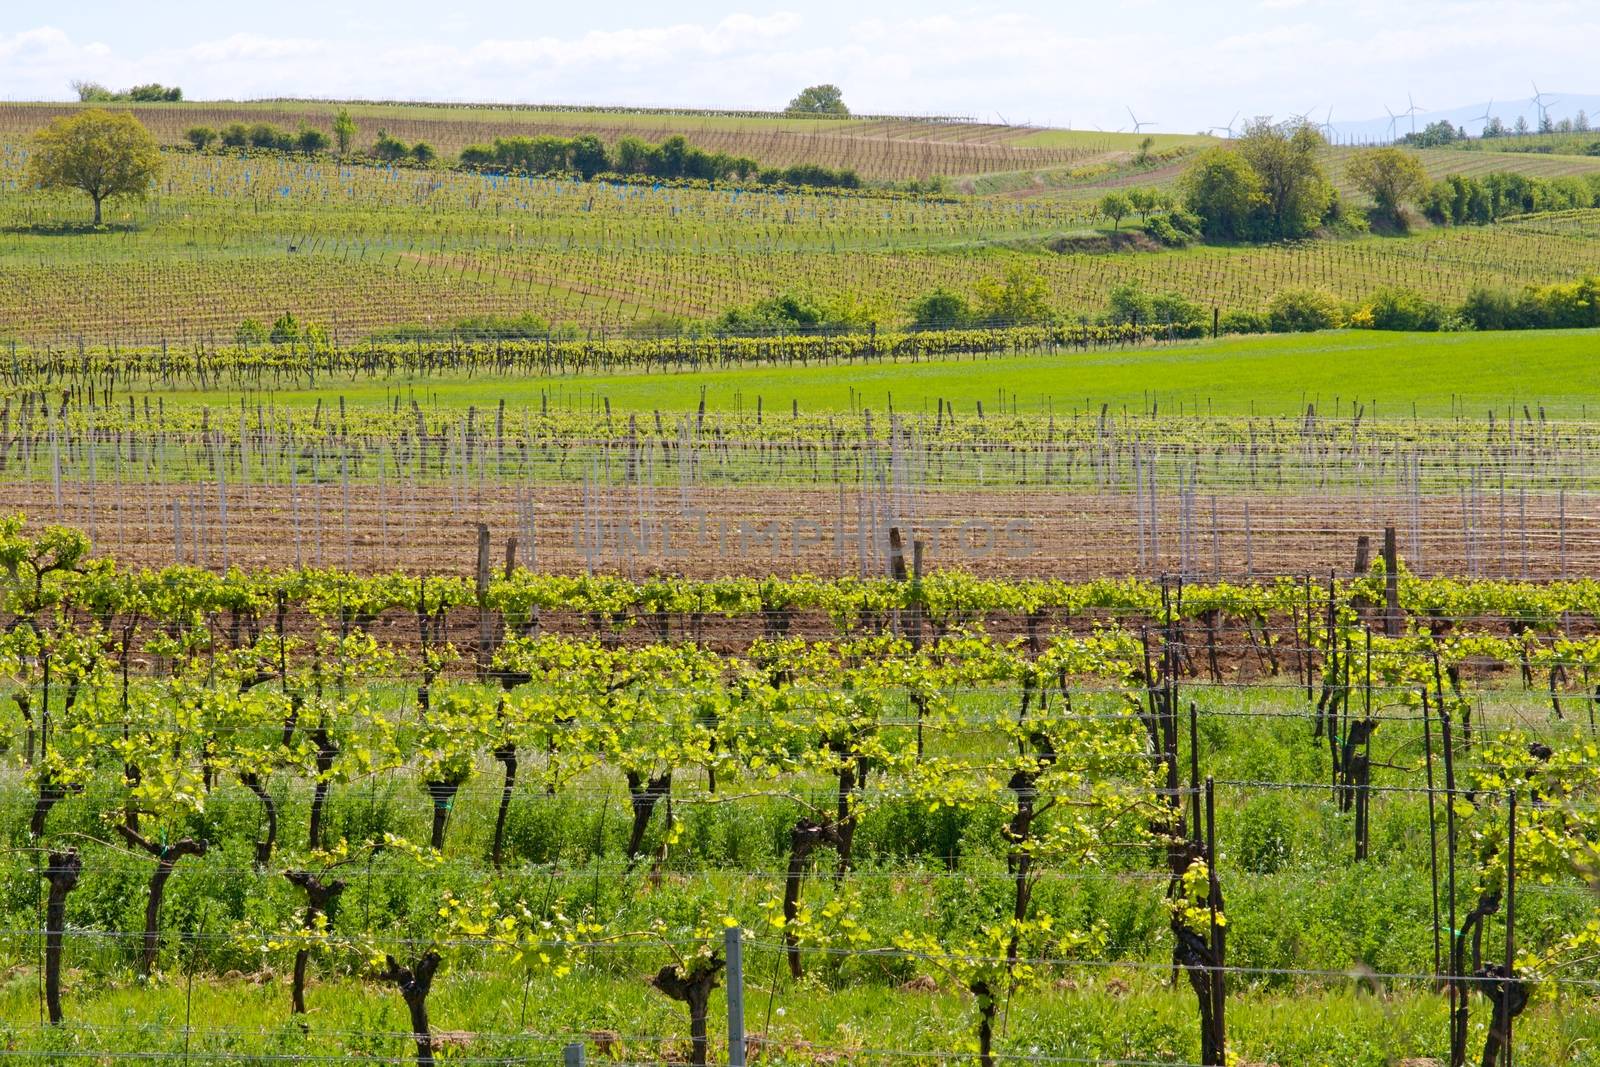 Photo shows genearl view of green vineyards.